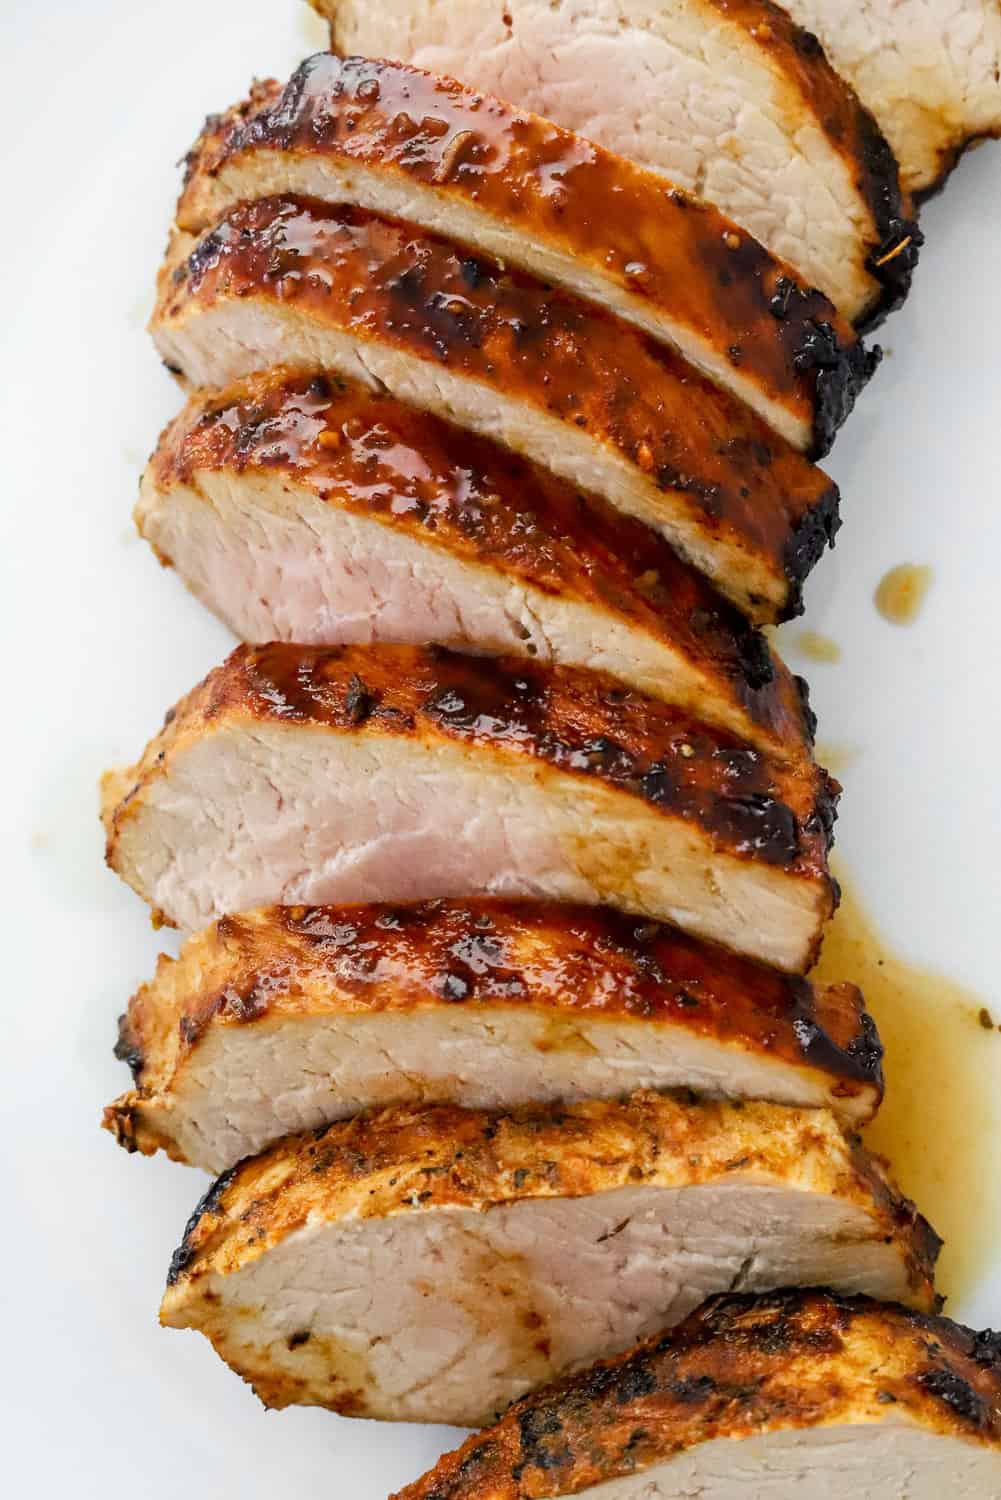 Cooked, sliced pork on a white plate.